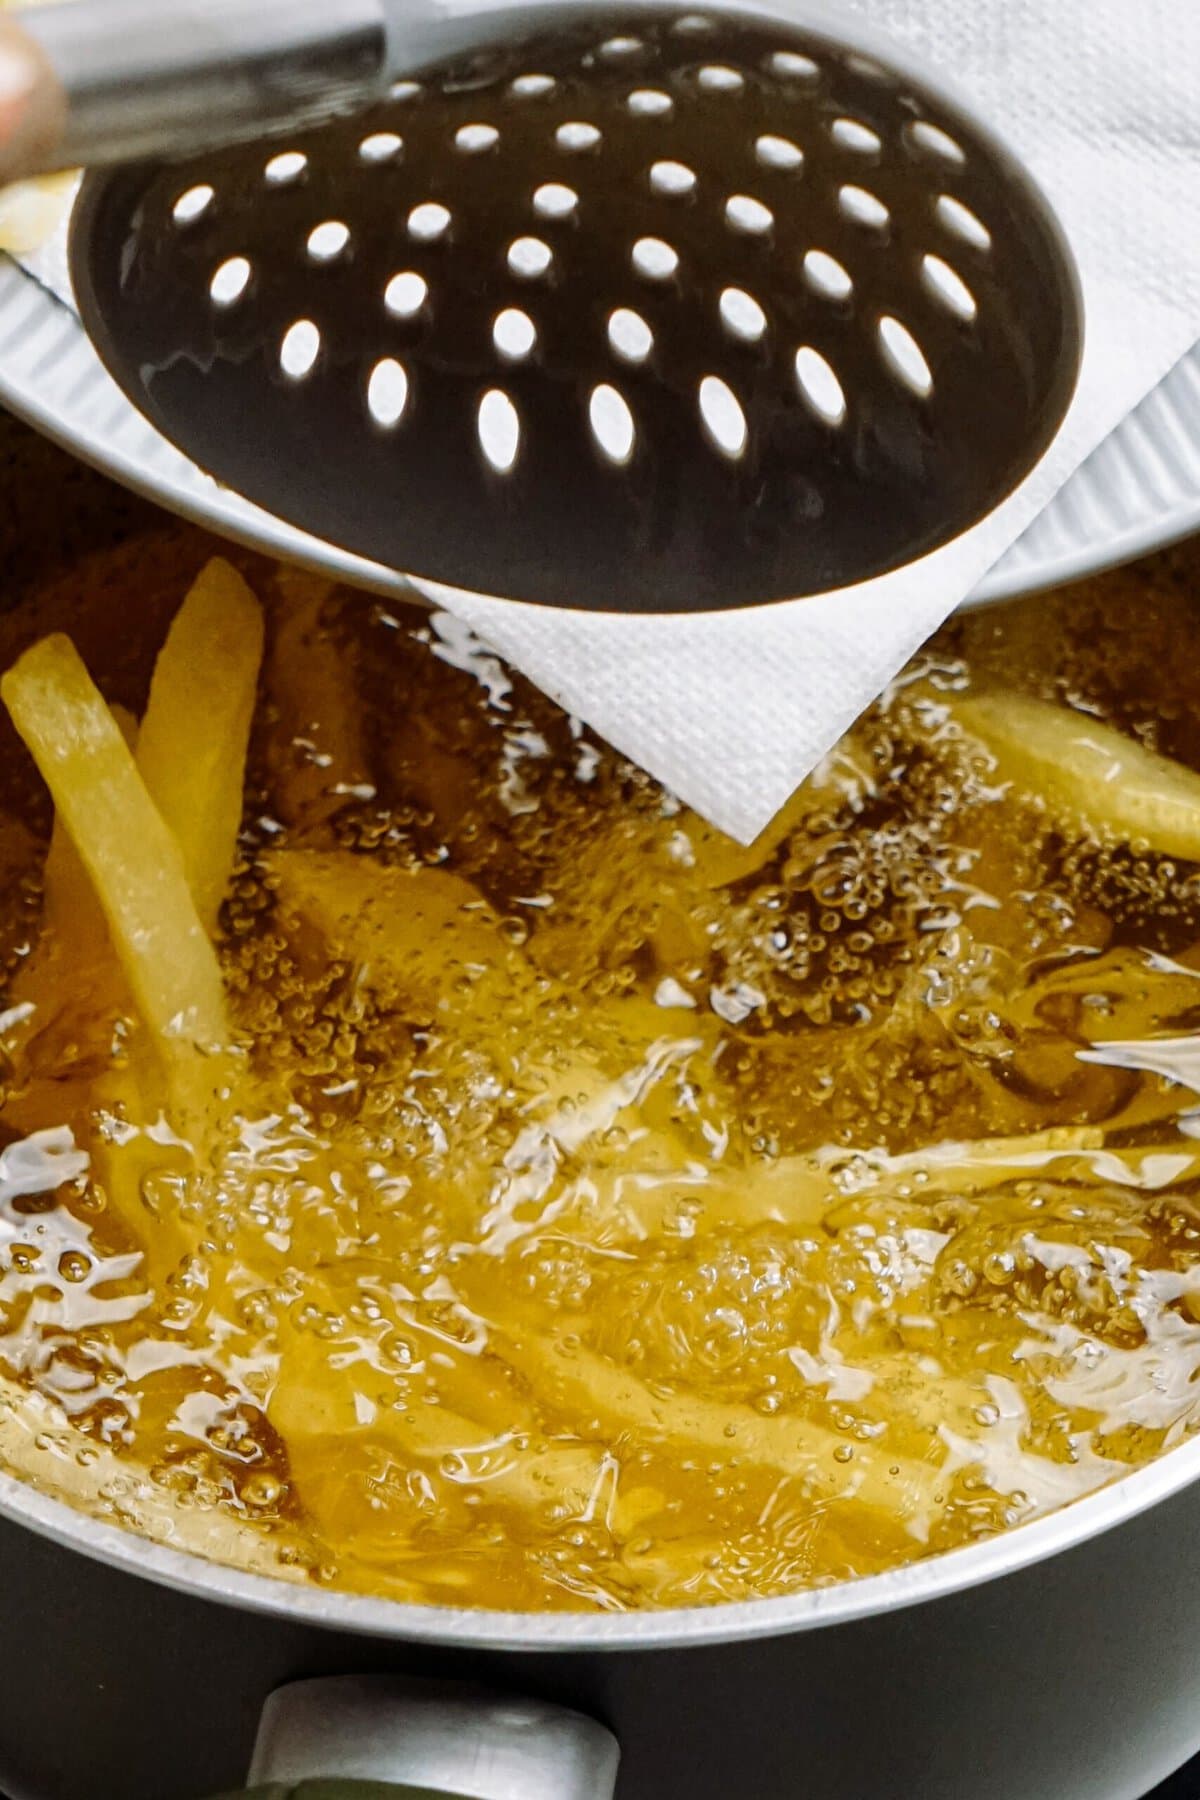 frites being added into a pot of hot oil